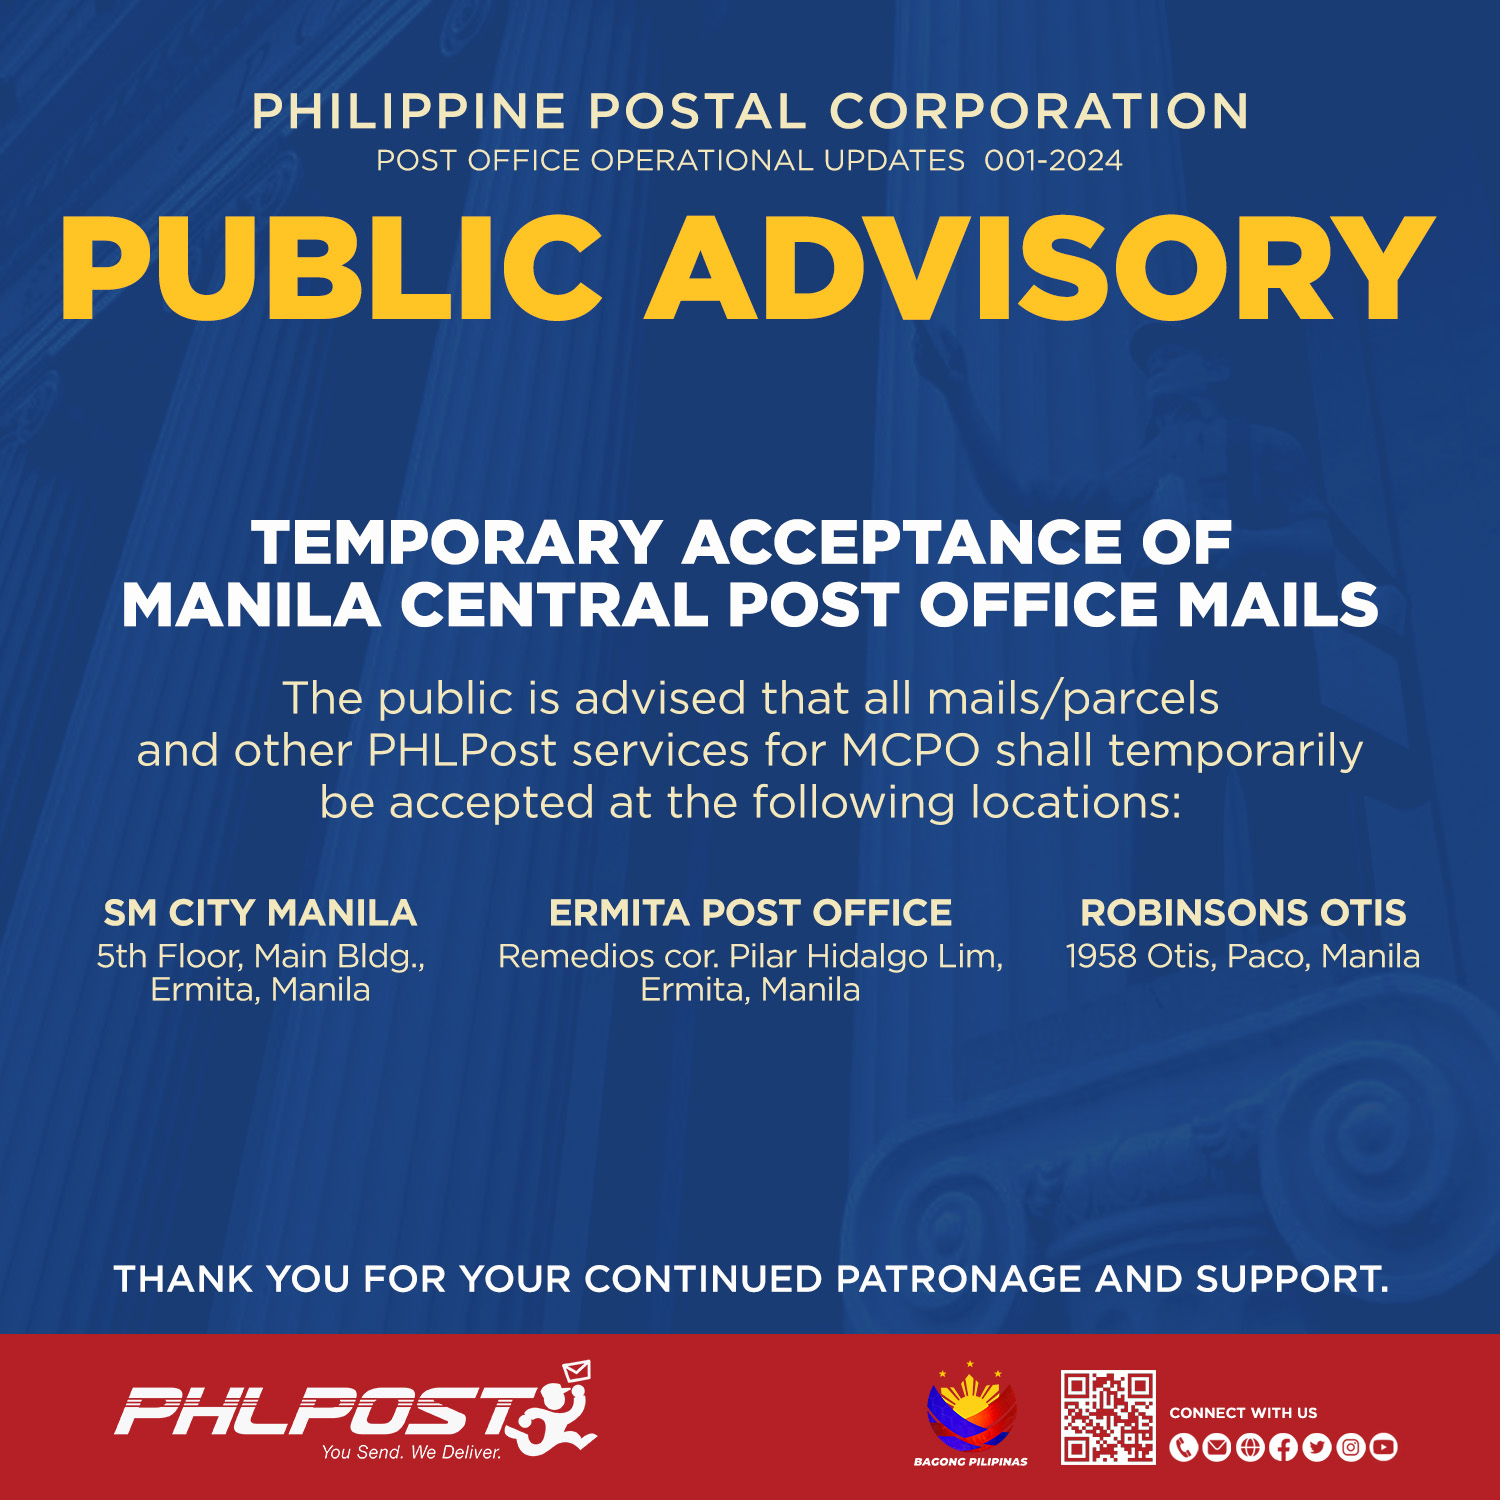 TEMPORARY ACCEPTANCE OF MANILA CENTRAL POST OFFICE MAILS